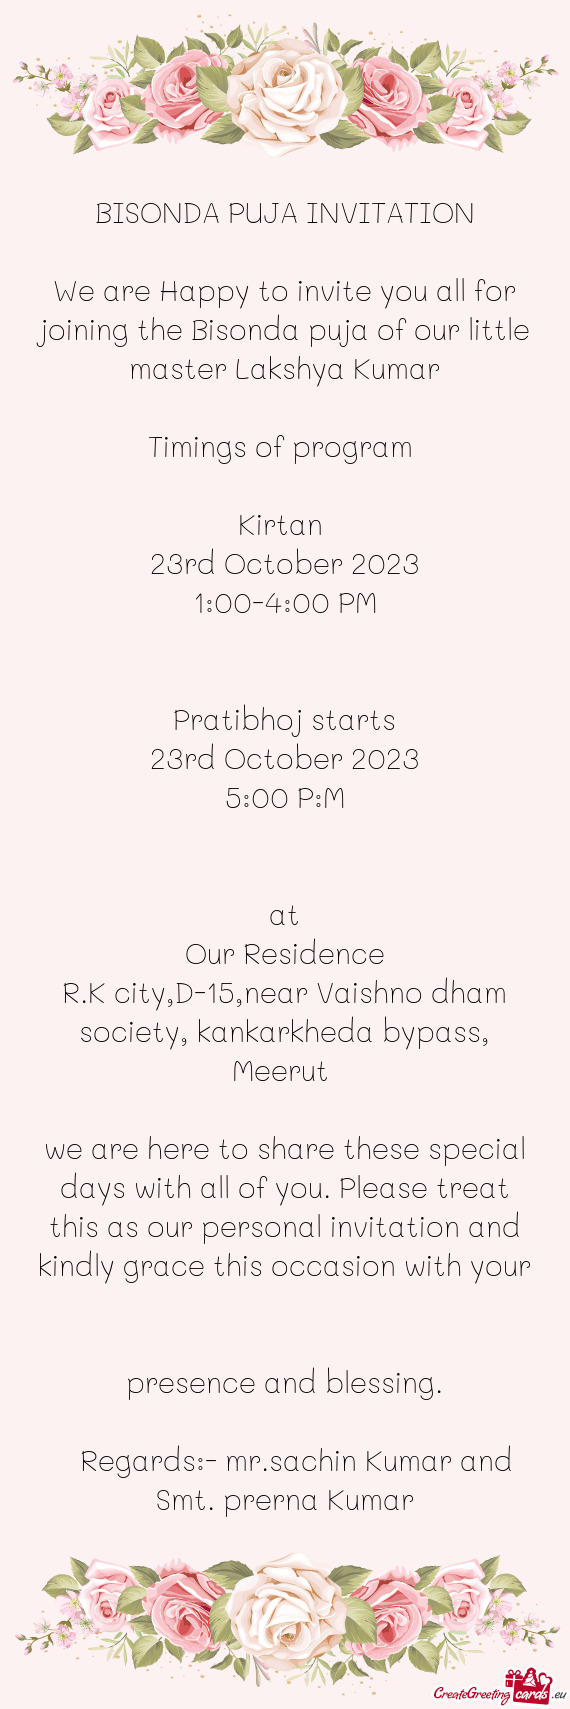 We are Happy to invite you all for joining the Bisonda puja of our little master Lakshya Kumar